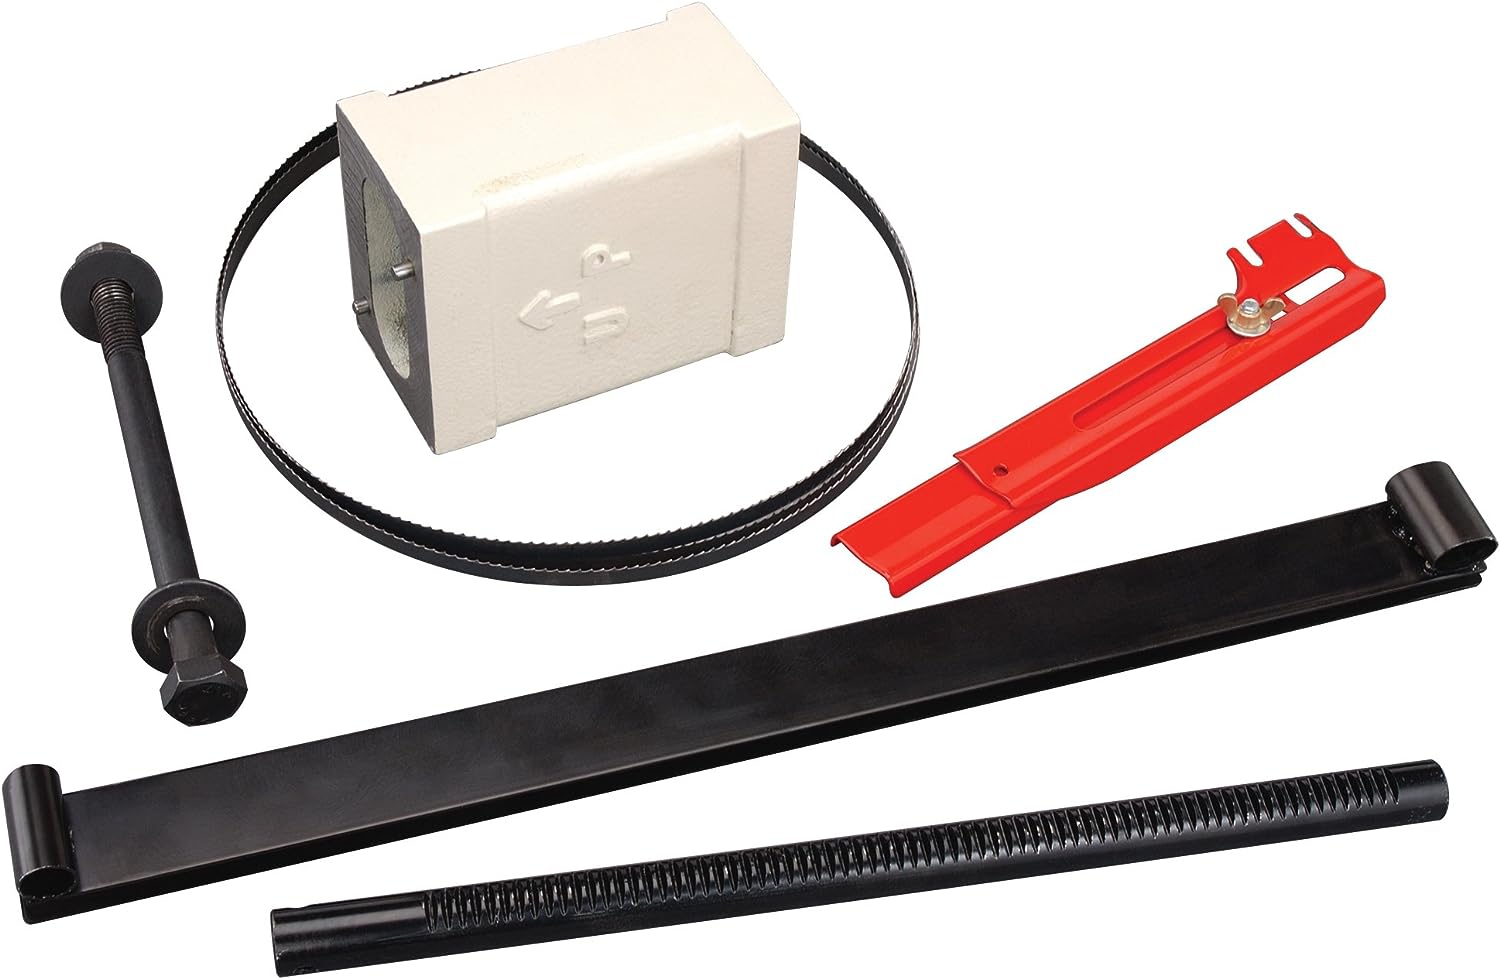 Shop Fox D3348 6-Inch Extension Block Kit for W1706 Band Saw